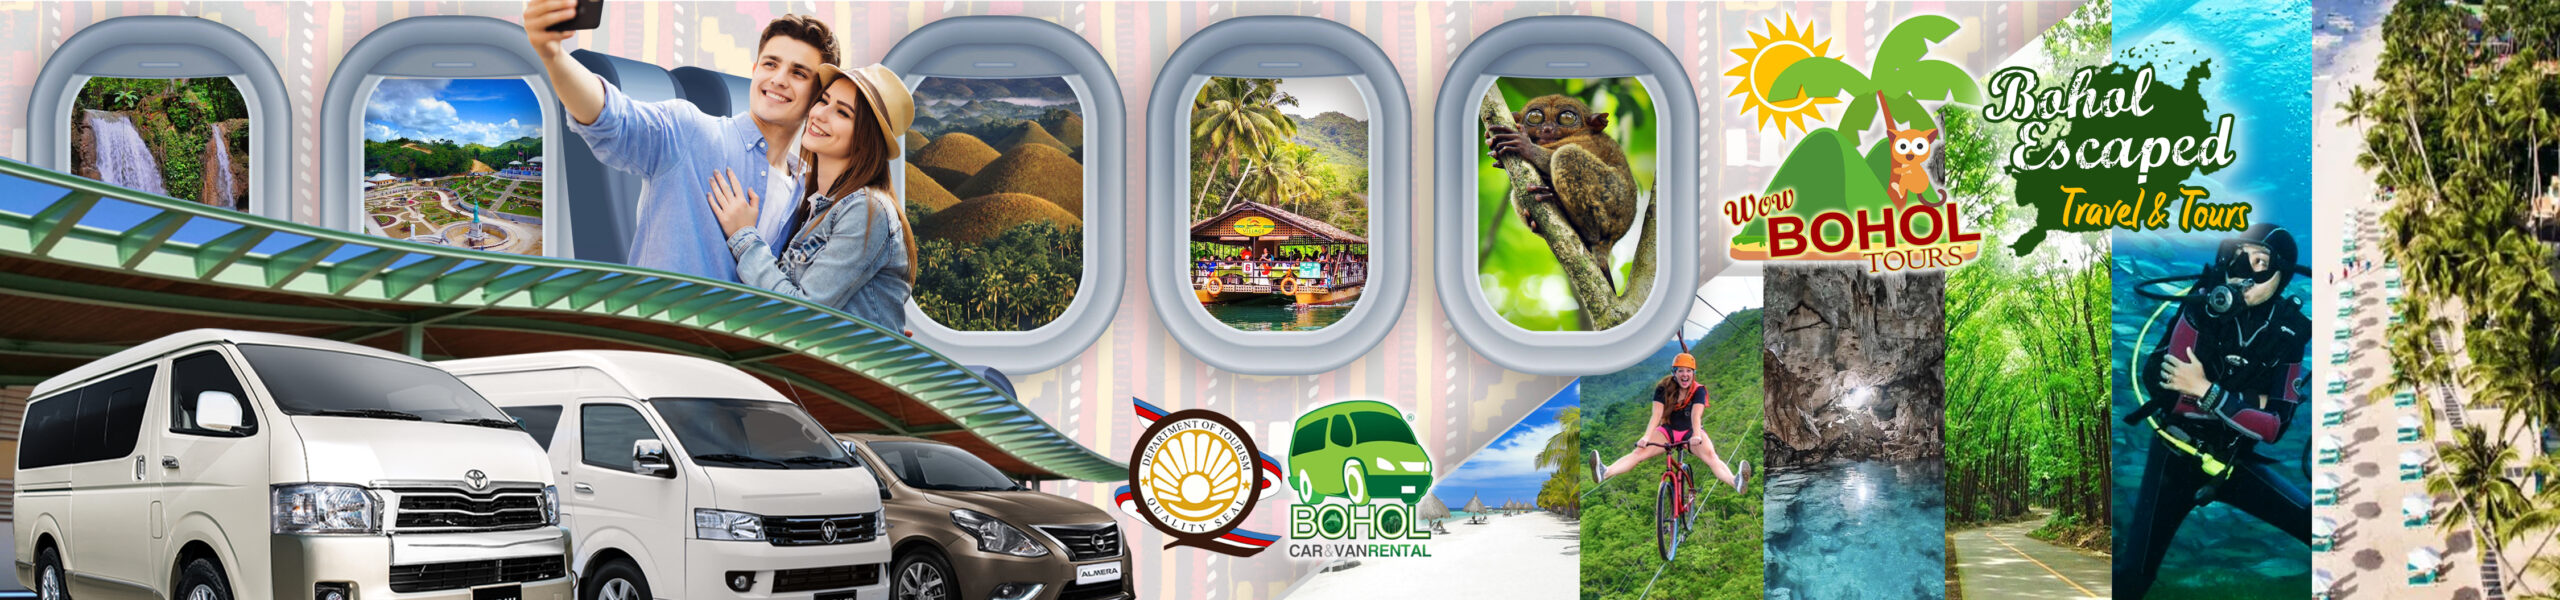 wow travel and tours bohol